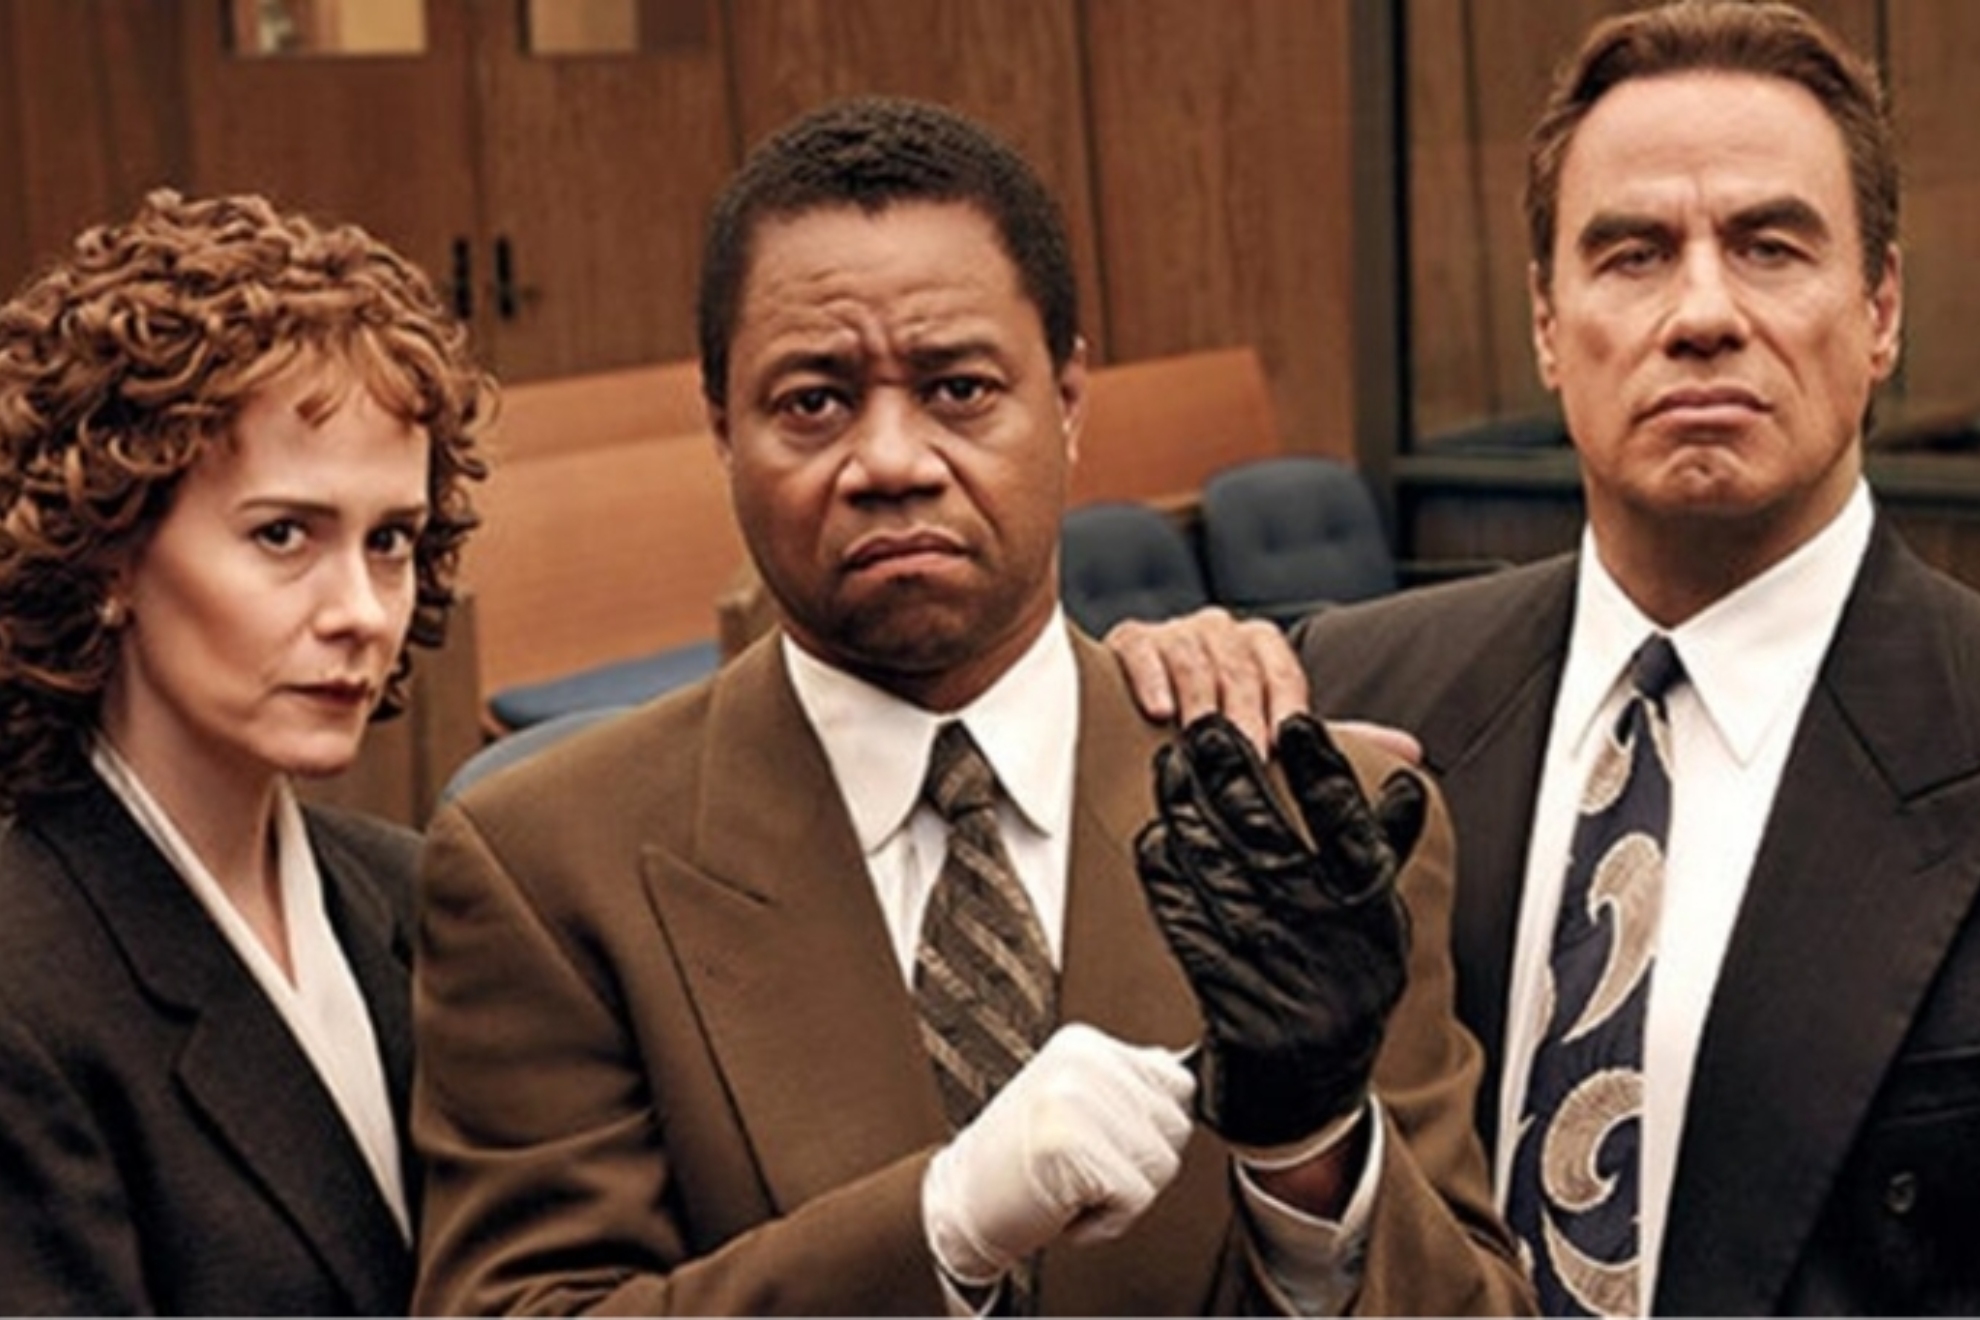 Image of the American Crime Story show on O.J. Simpson